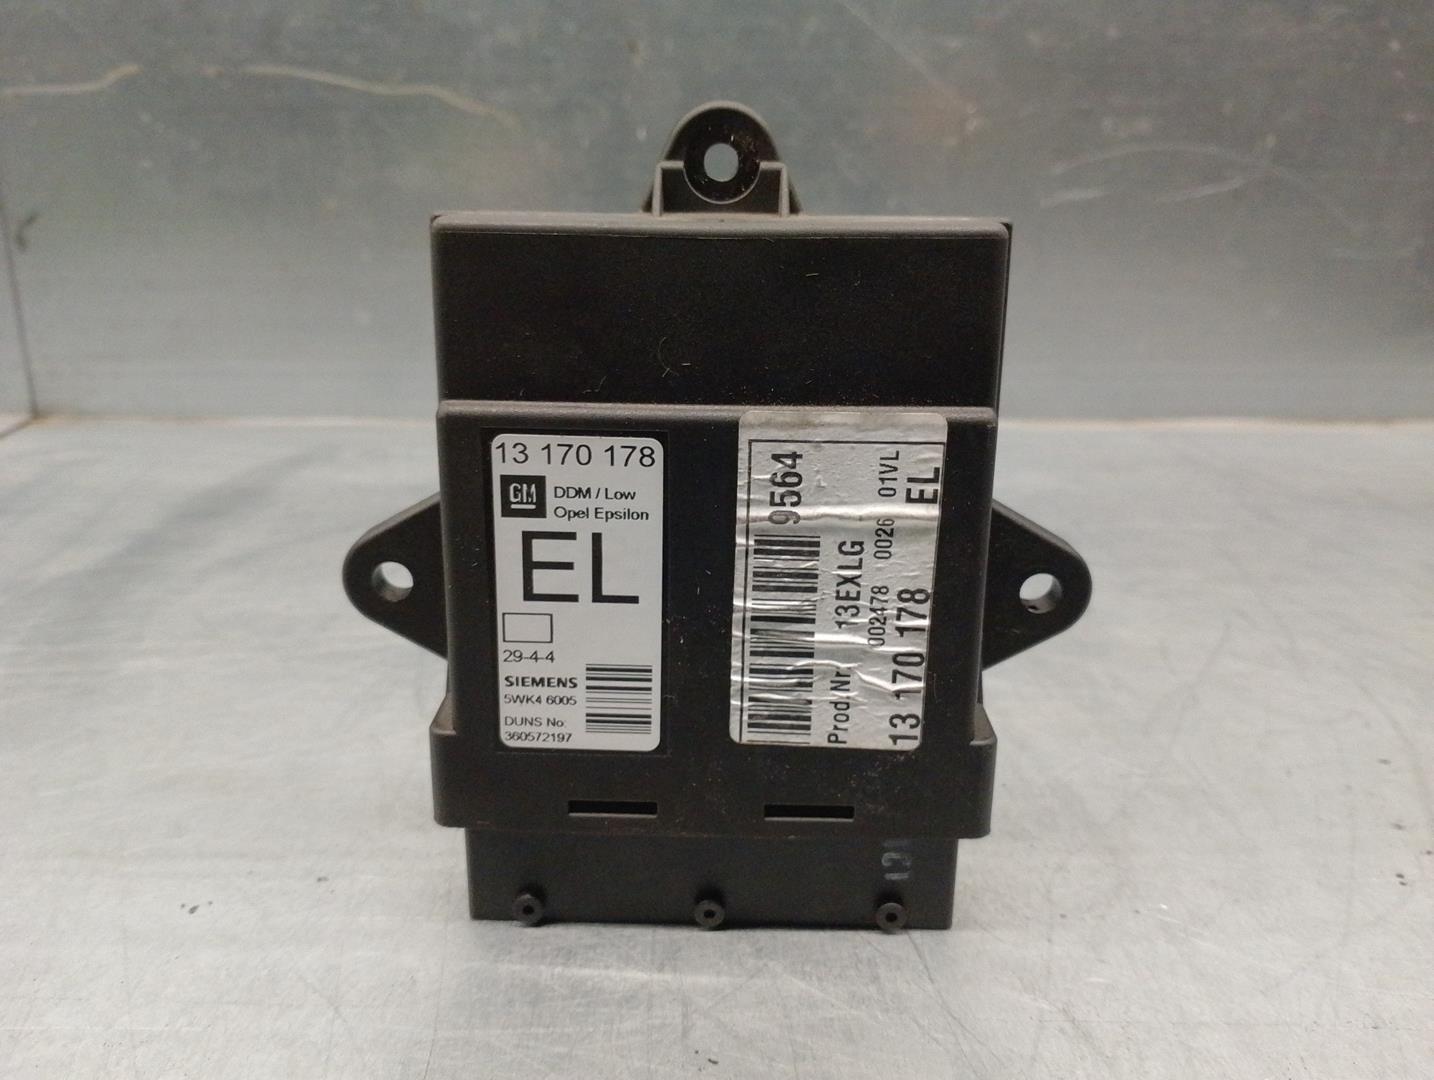 OPEL Vectra 3 generation (2000-2007) Other Control Units 13170178, 5WK46005, SIEMENS 24175630